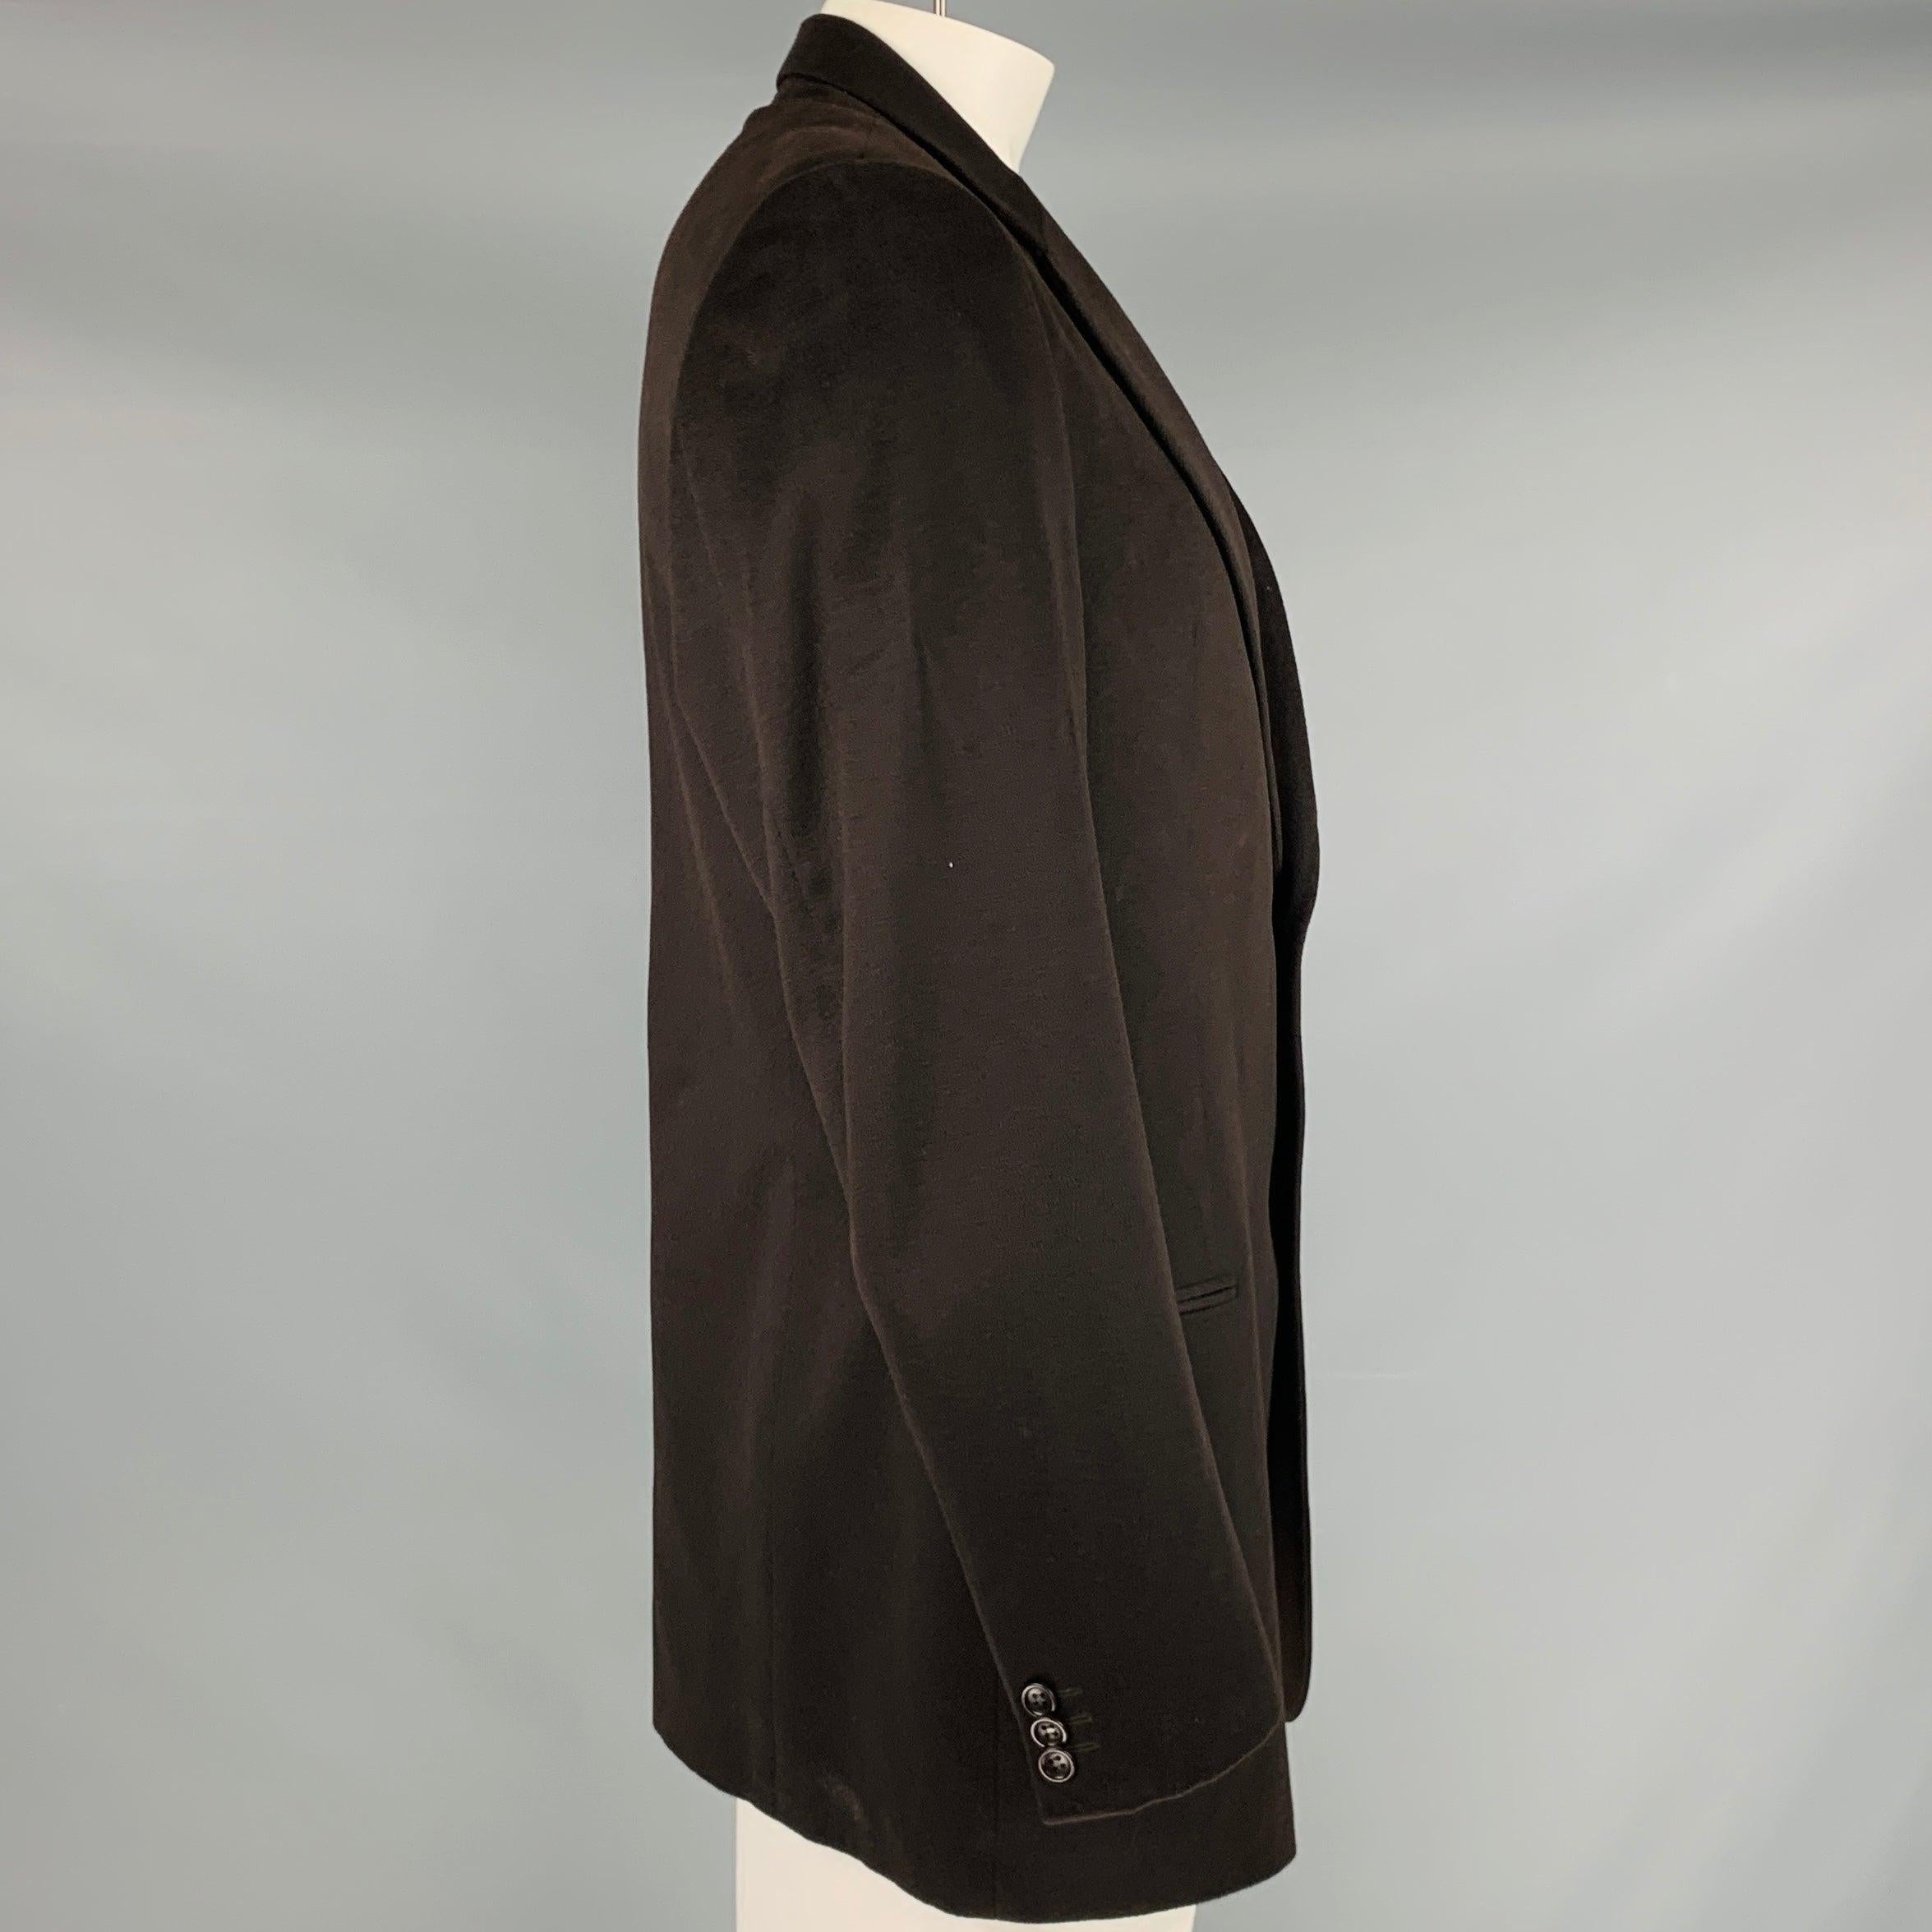 ARMANI COLLEZIONI long sport coat
in a brown cashmere fabric featuring a single breasted style, notch lapel, ventless back, and double button closure. Made in Italy.Excellent Pre-Owned Condition. 

Marked:   44L 

Measurements: 
 
Shoulder: 18.5